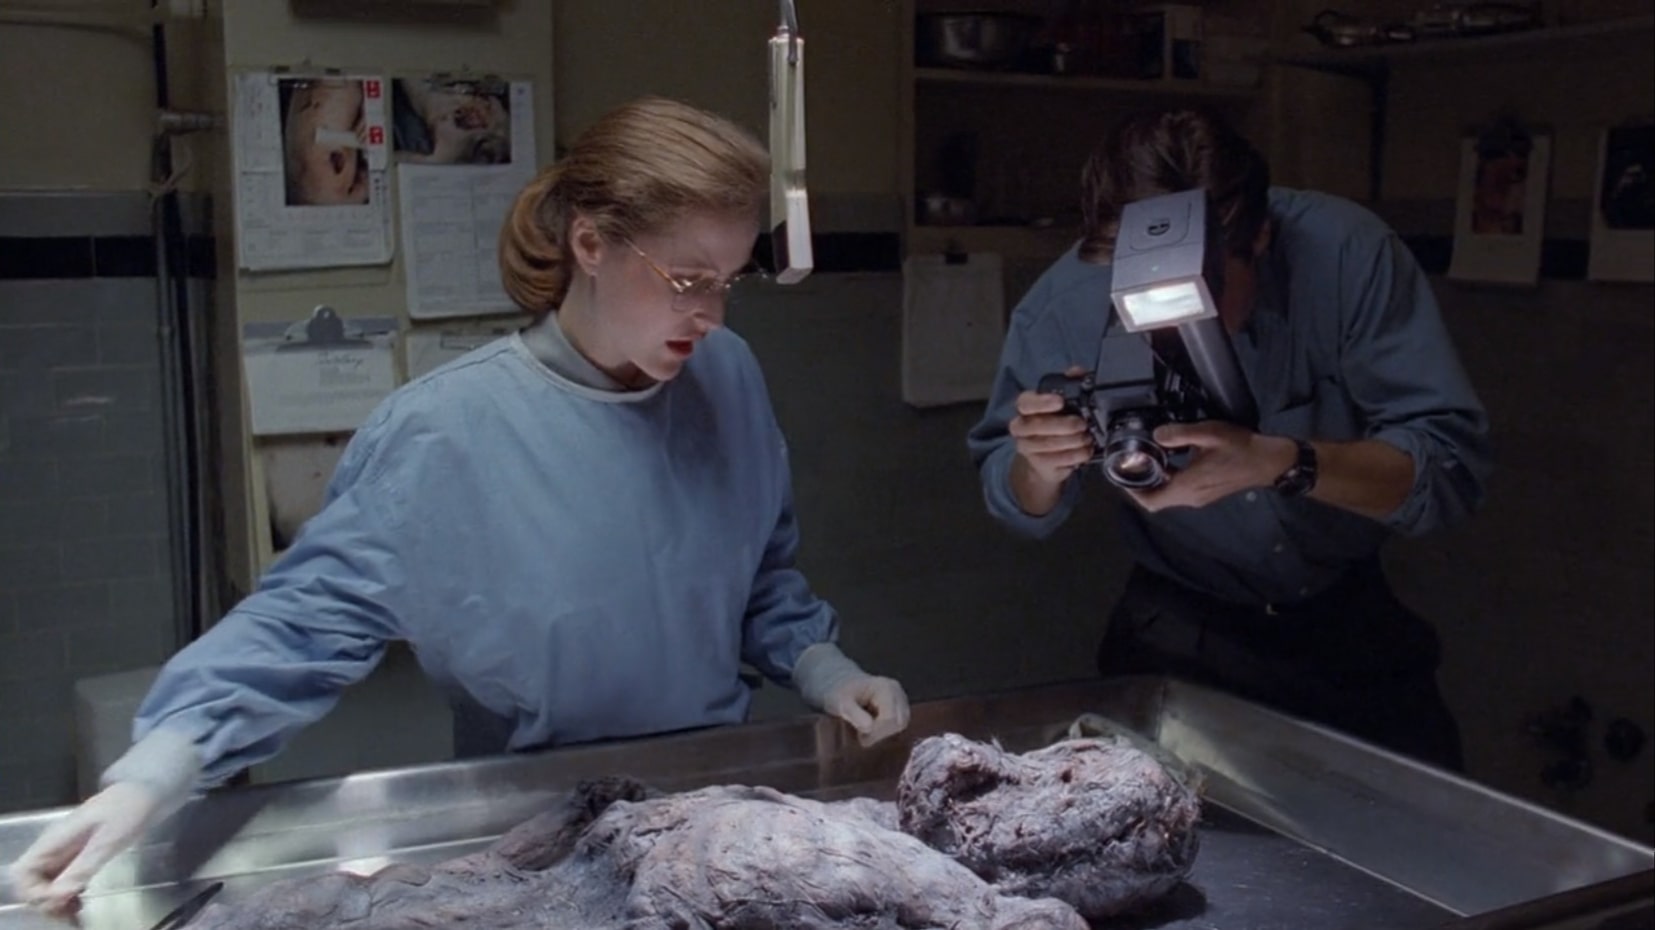 Scully is dressed in a blue scrub with medical gloves pulled on. She's wearing glasses and has her red hair pulled back into a ponytail. She is looking down at a strange disfigured body in advanced decomposition on a metal autopsy table. The face looks unrecognizable. Mulder, to her left, wearing a blue button up long-sleeved shirt with the sleeves rolled up and a dark watch on his wrist, leans in to take a picture with his high quality camera. On the walls behind them are clipboards filled with forms and printouts along with autopsy photos.